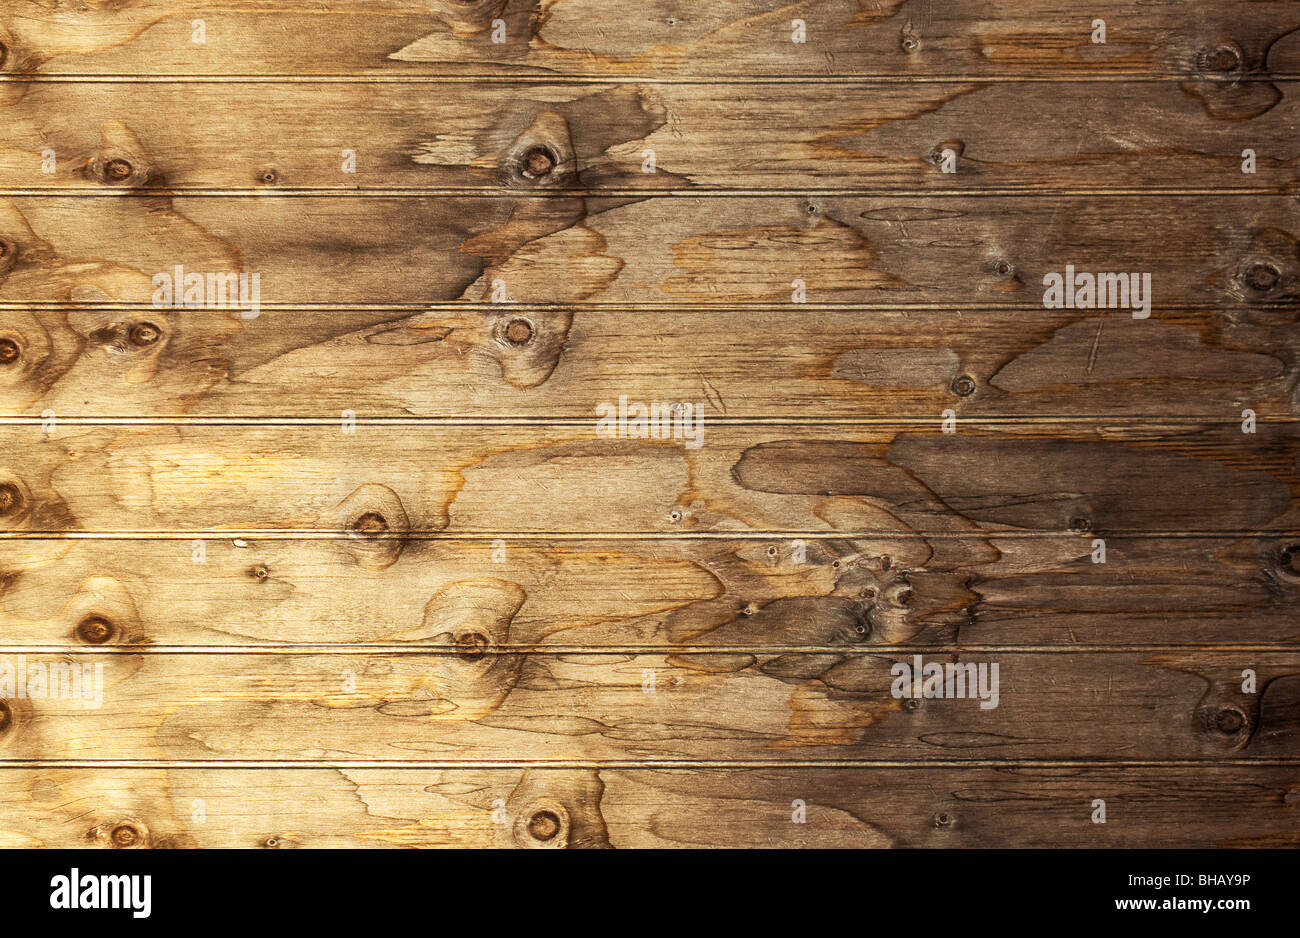 High resolution image of old wooden surface - perfect as a backdrop for people or products Stock Photo